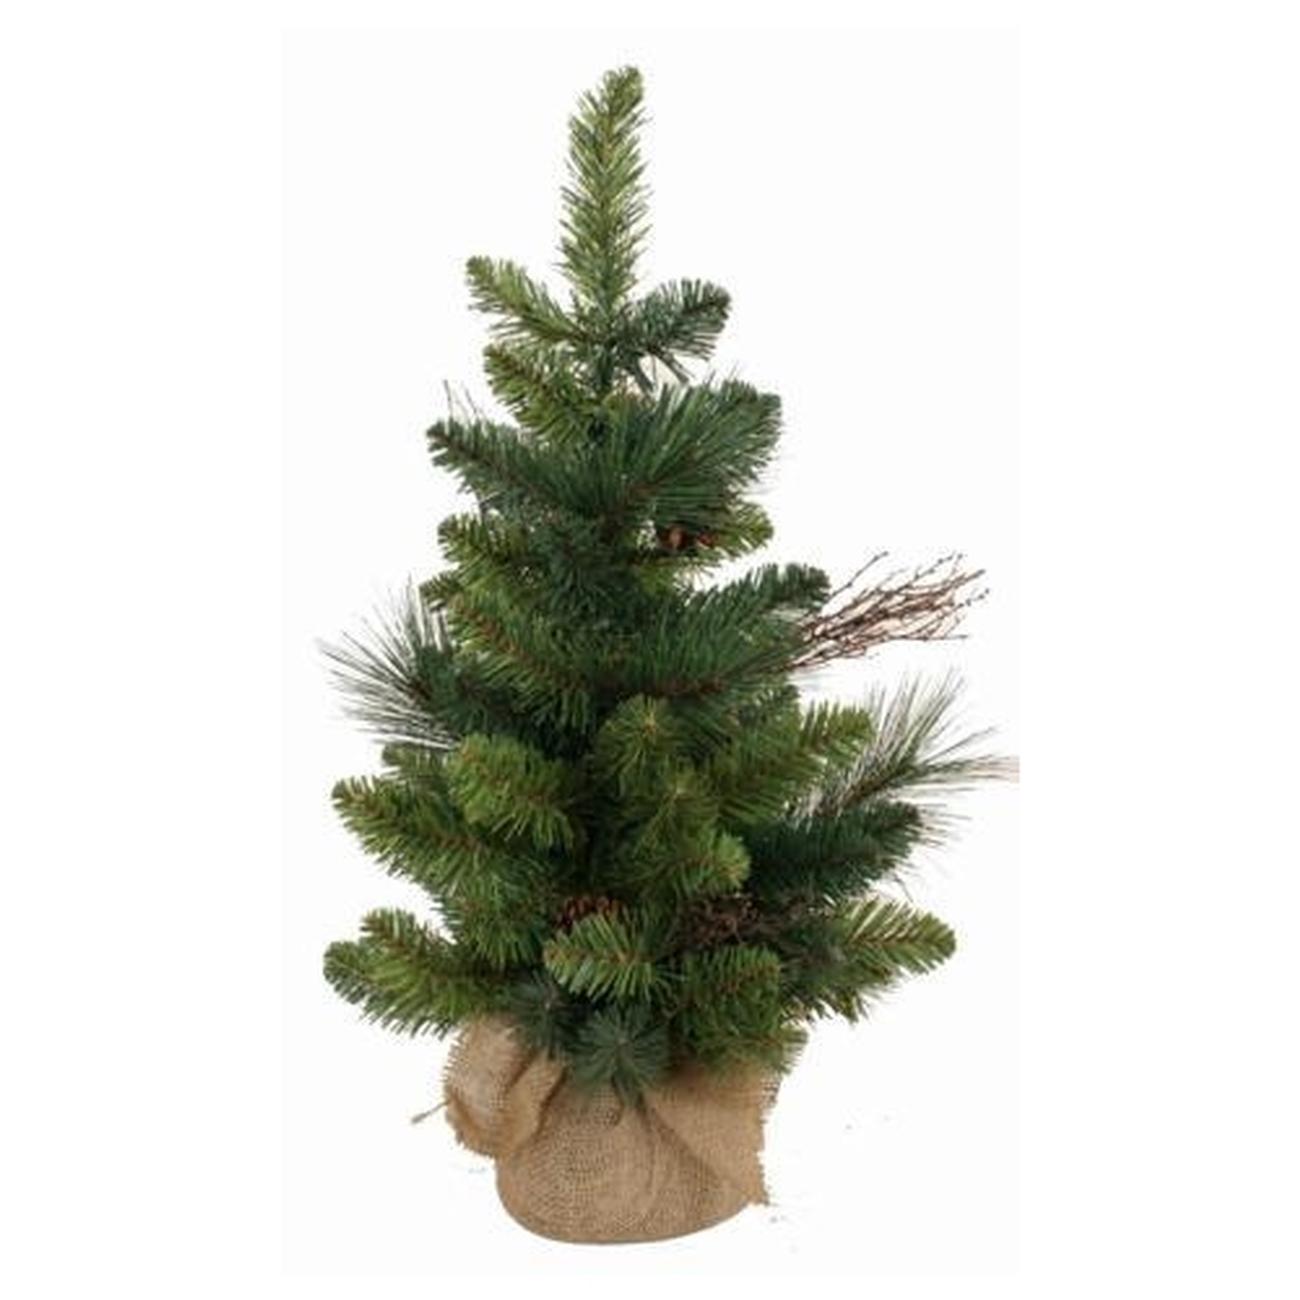 artificial-mixed-pine-tree-2ft - Artificial Mixed Pine Tree 2ft